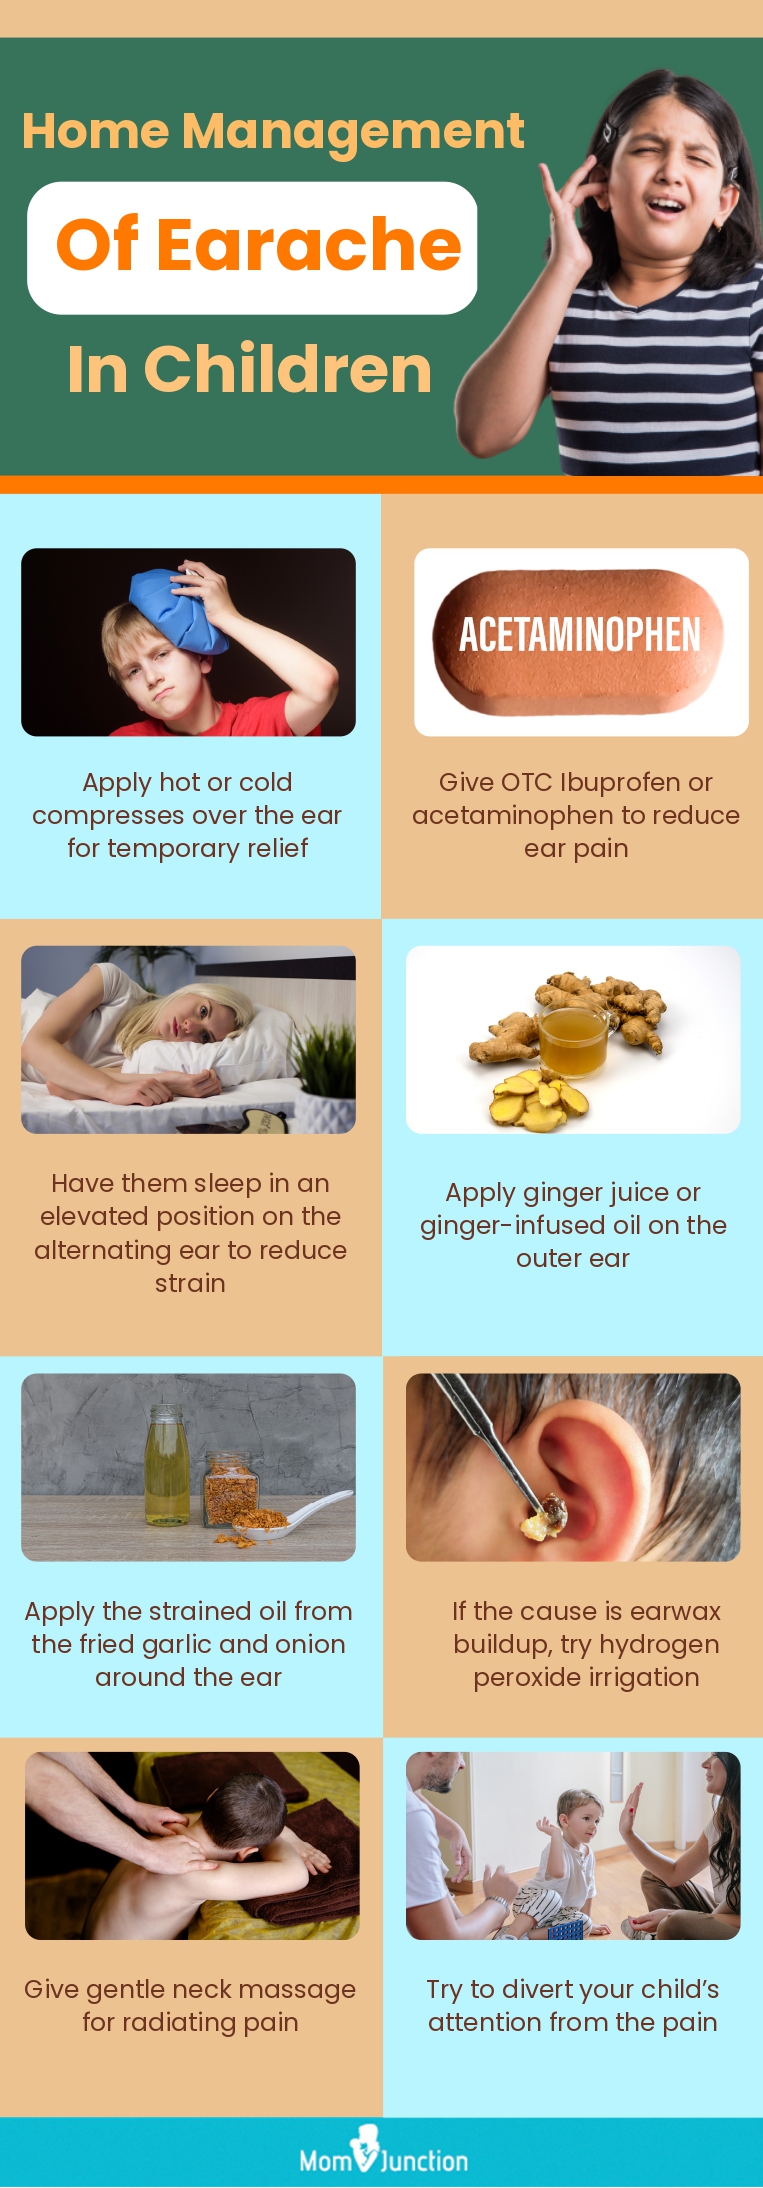 home management of earache in children (infographic)